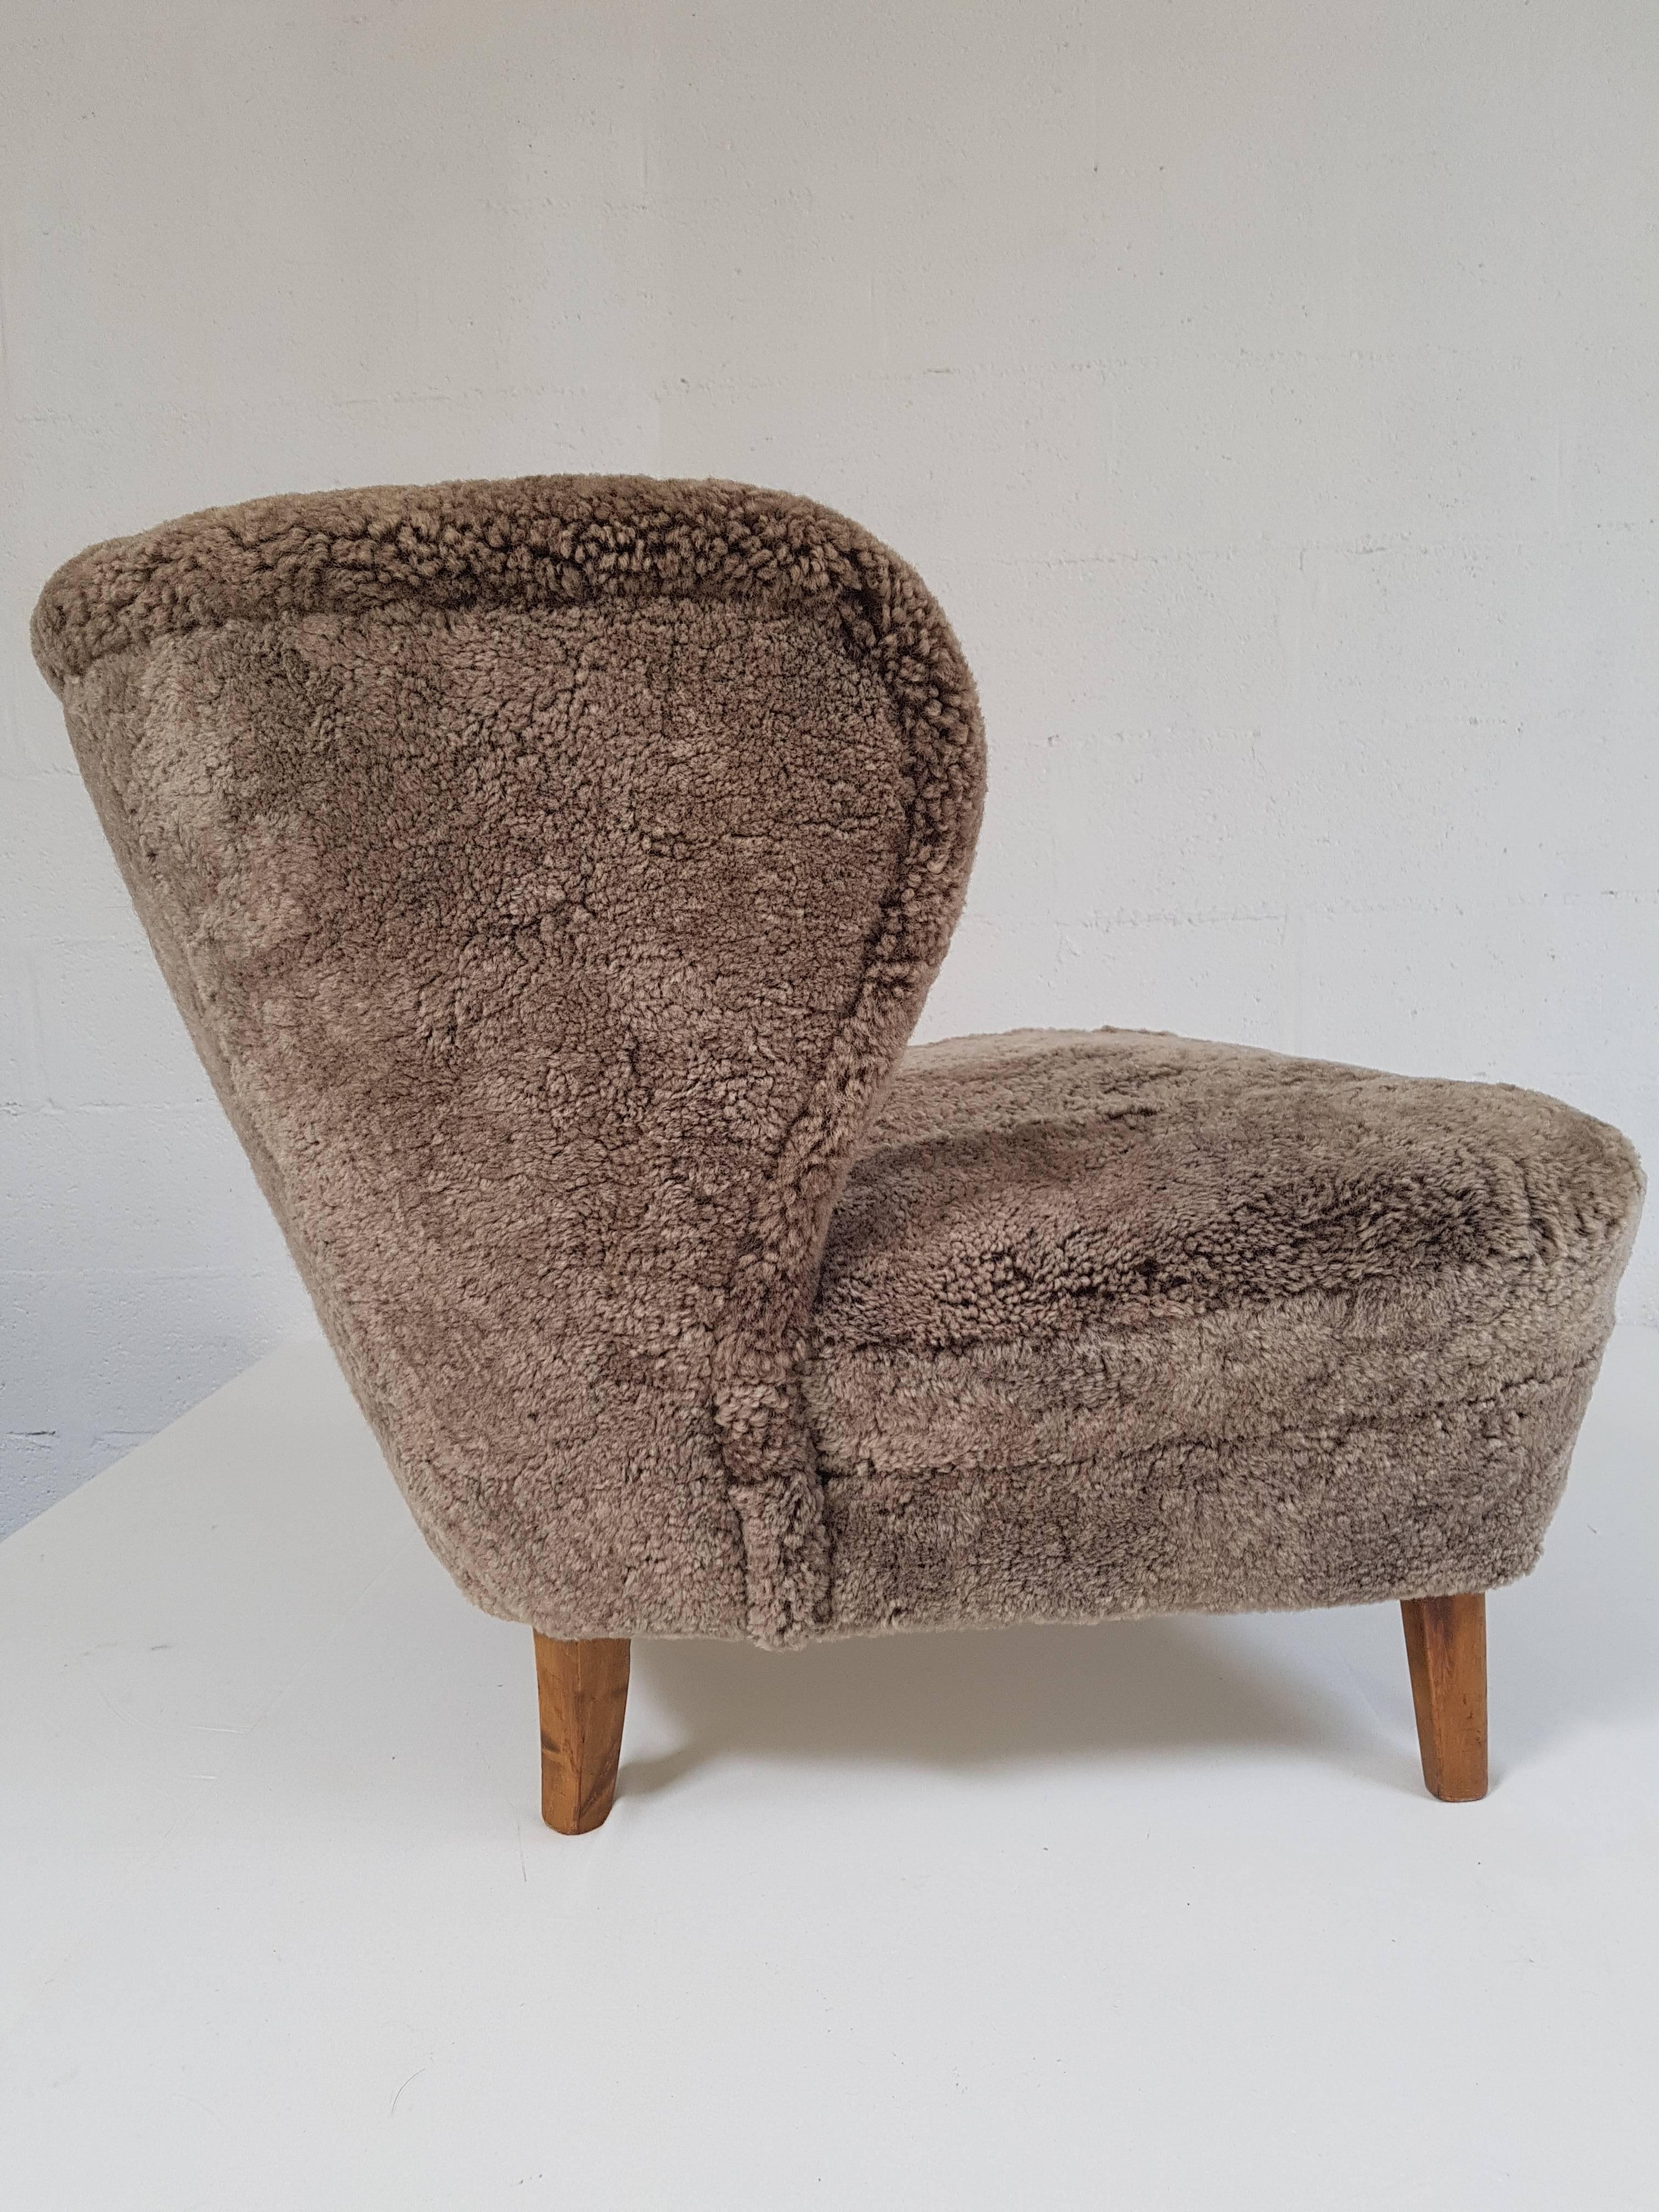 Hand-Crafted Armchair Gosta Jonsson, circa 1940, Curly Shearling Upholstery